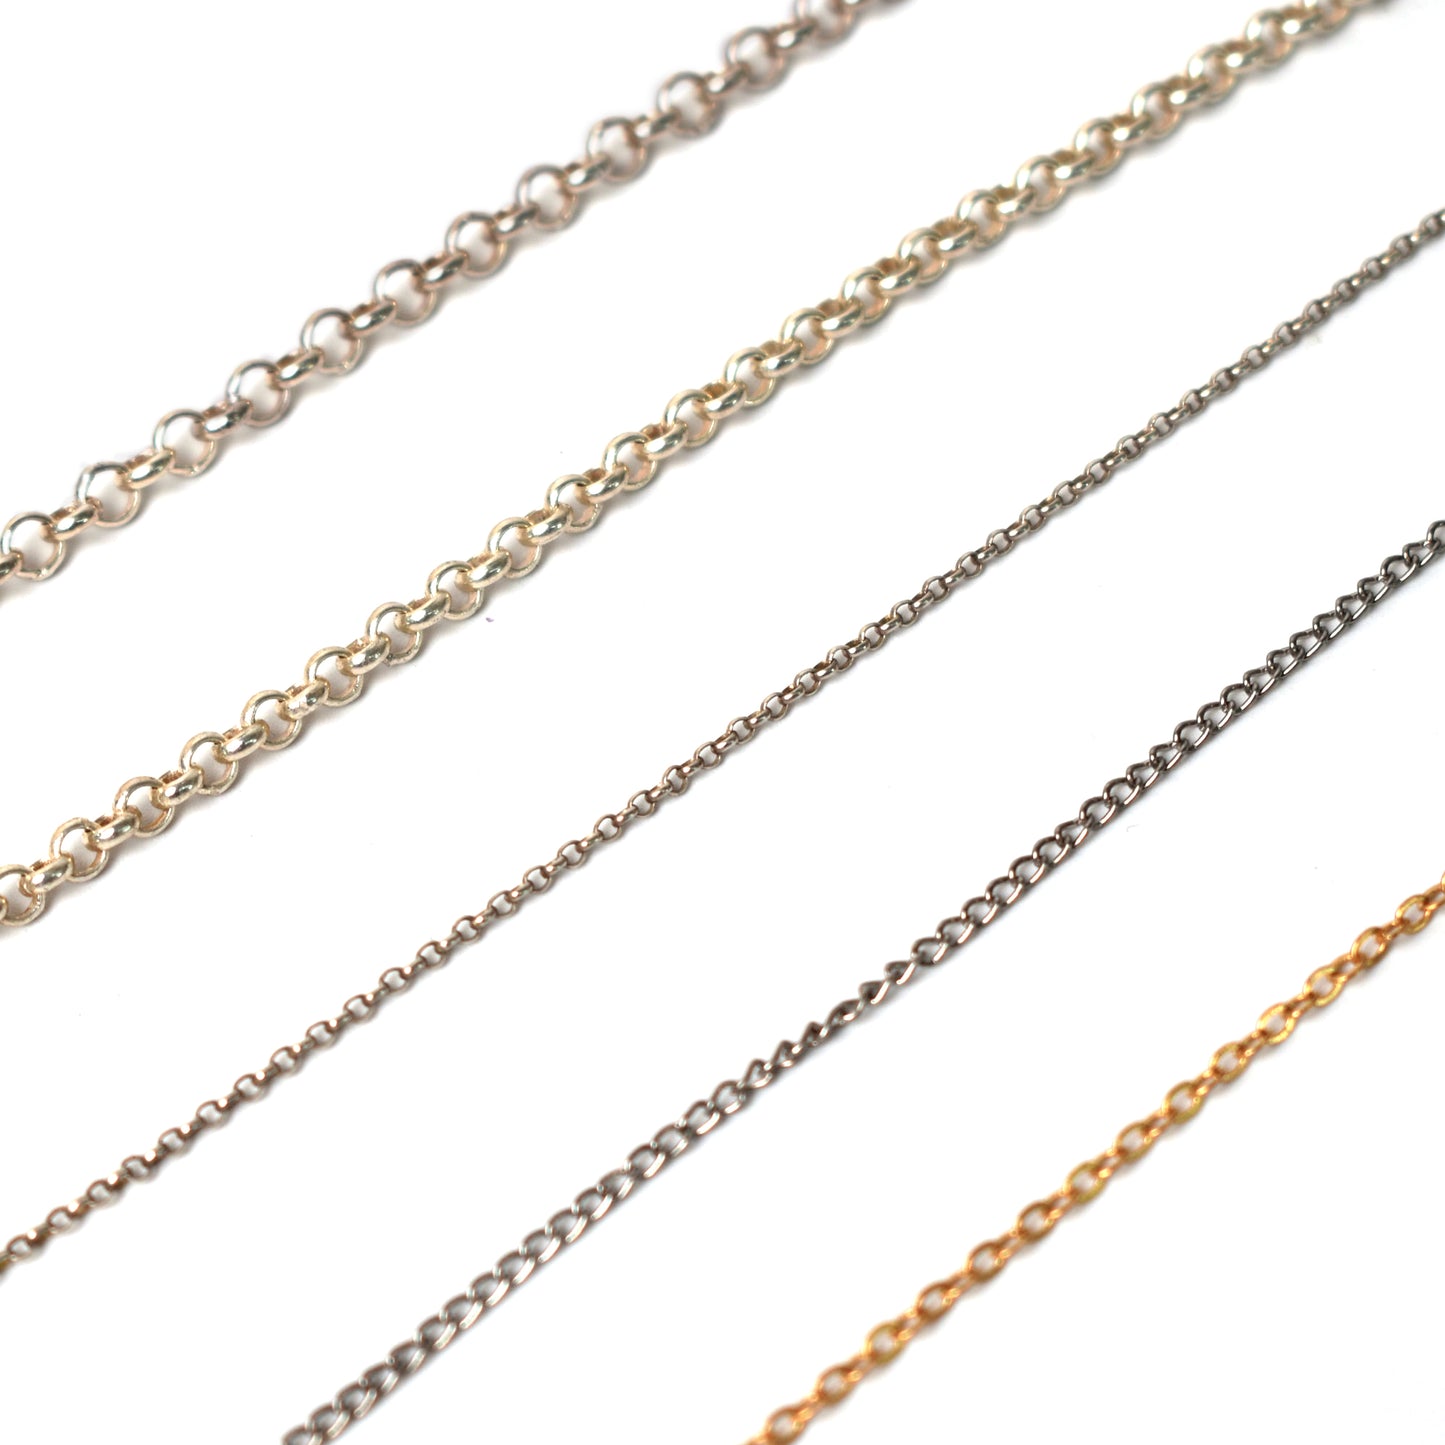 Sterling Siver / Pewter / Brass Necklace Chain For Mens Women Jewelry 1.5mm 2mm 3mm 4mm , Length 16-24"